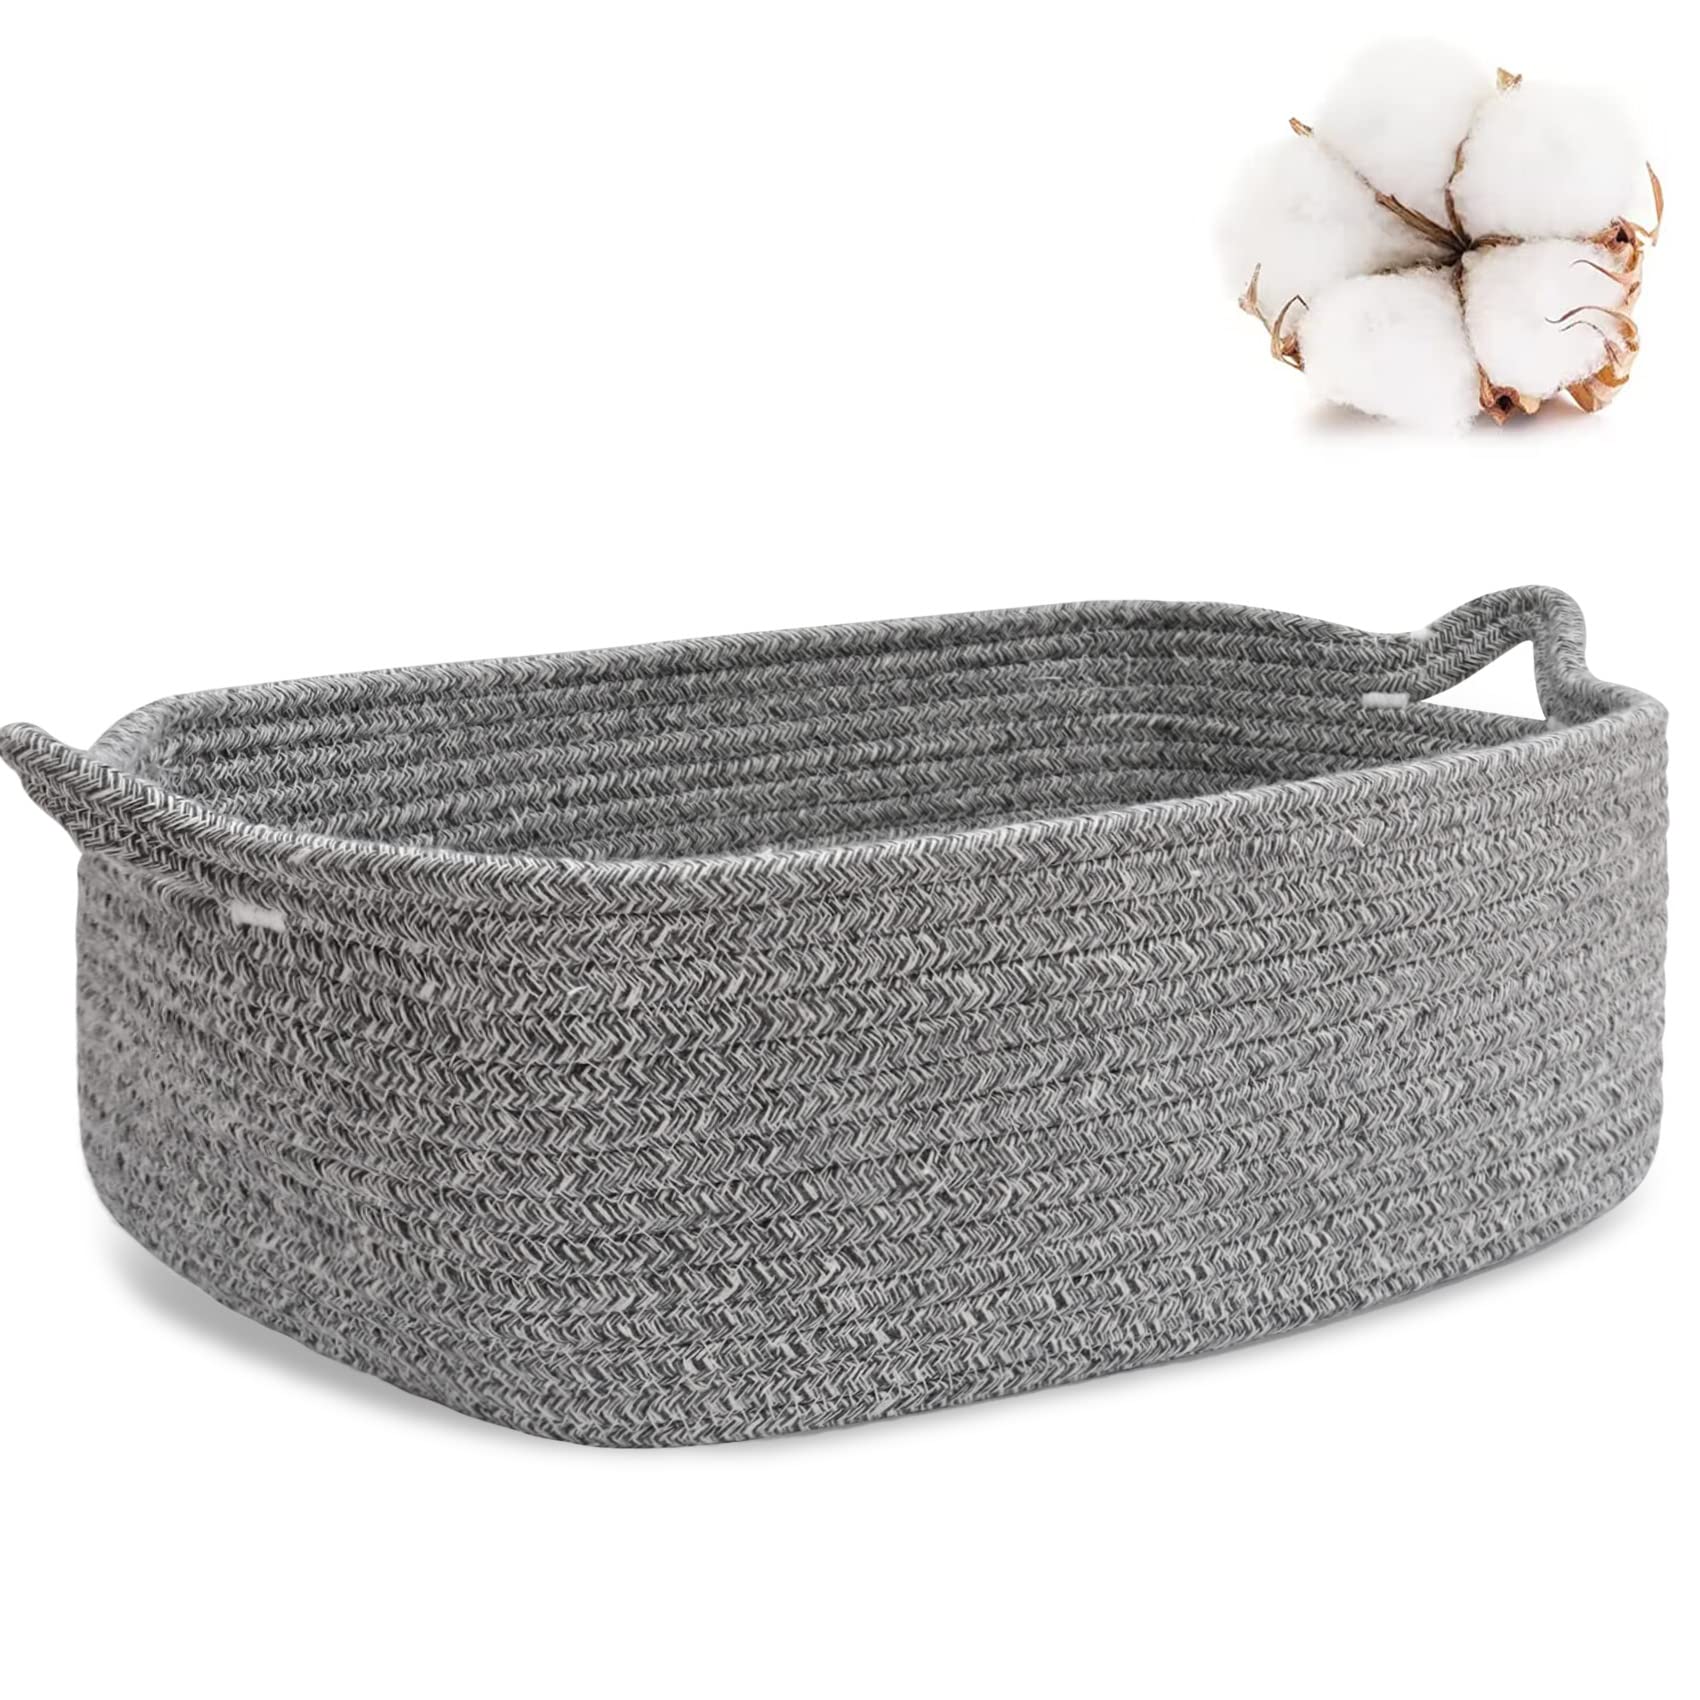 ABenkle Rope Storage Basket, 14.2''x 11''x 5.1'' Cotton Woven Dog Cat Toy Bins, Cube Soft Baskets with Handles, Decorative Shelves Closet Organizing for Nursery Laundry Bedroom Bathroom - Grey